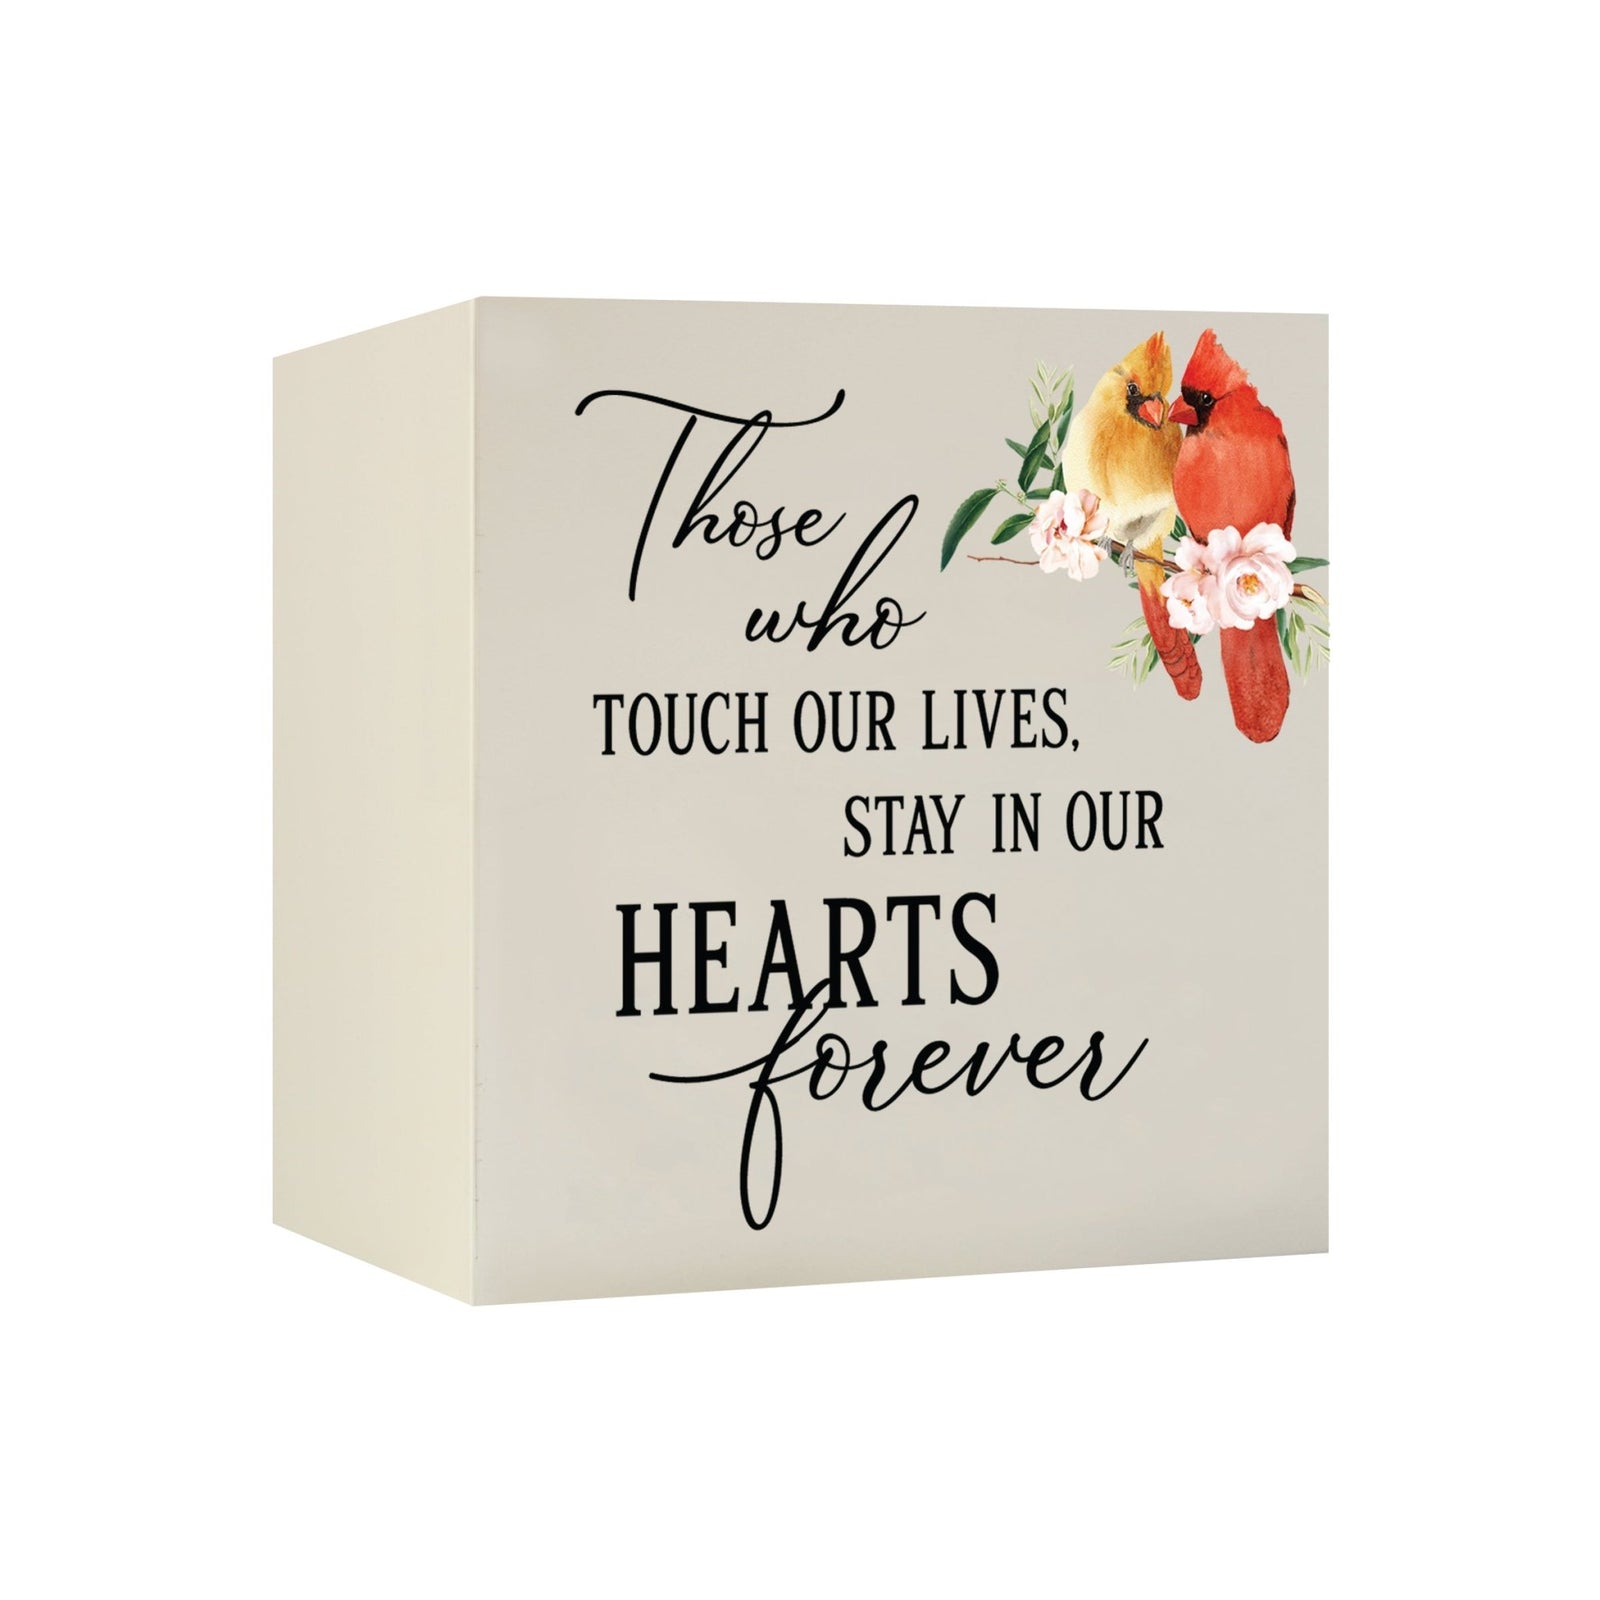 Decorative wooden urns for human ashes, a thoughtful and respectful choice for a memorial.